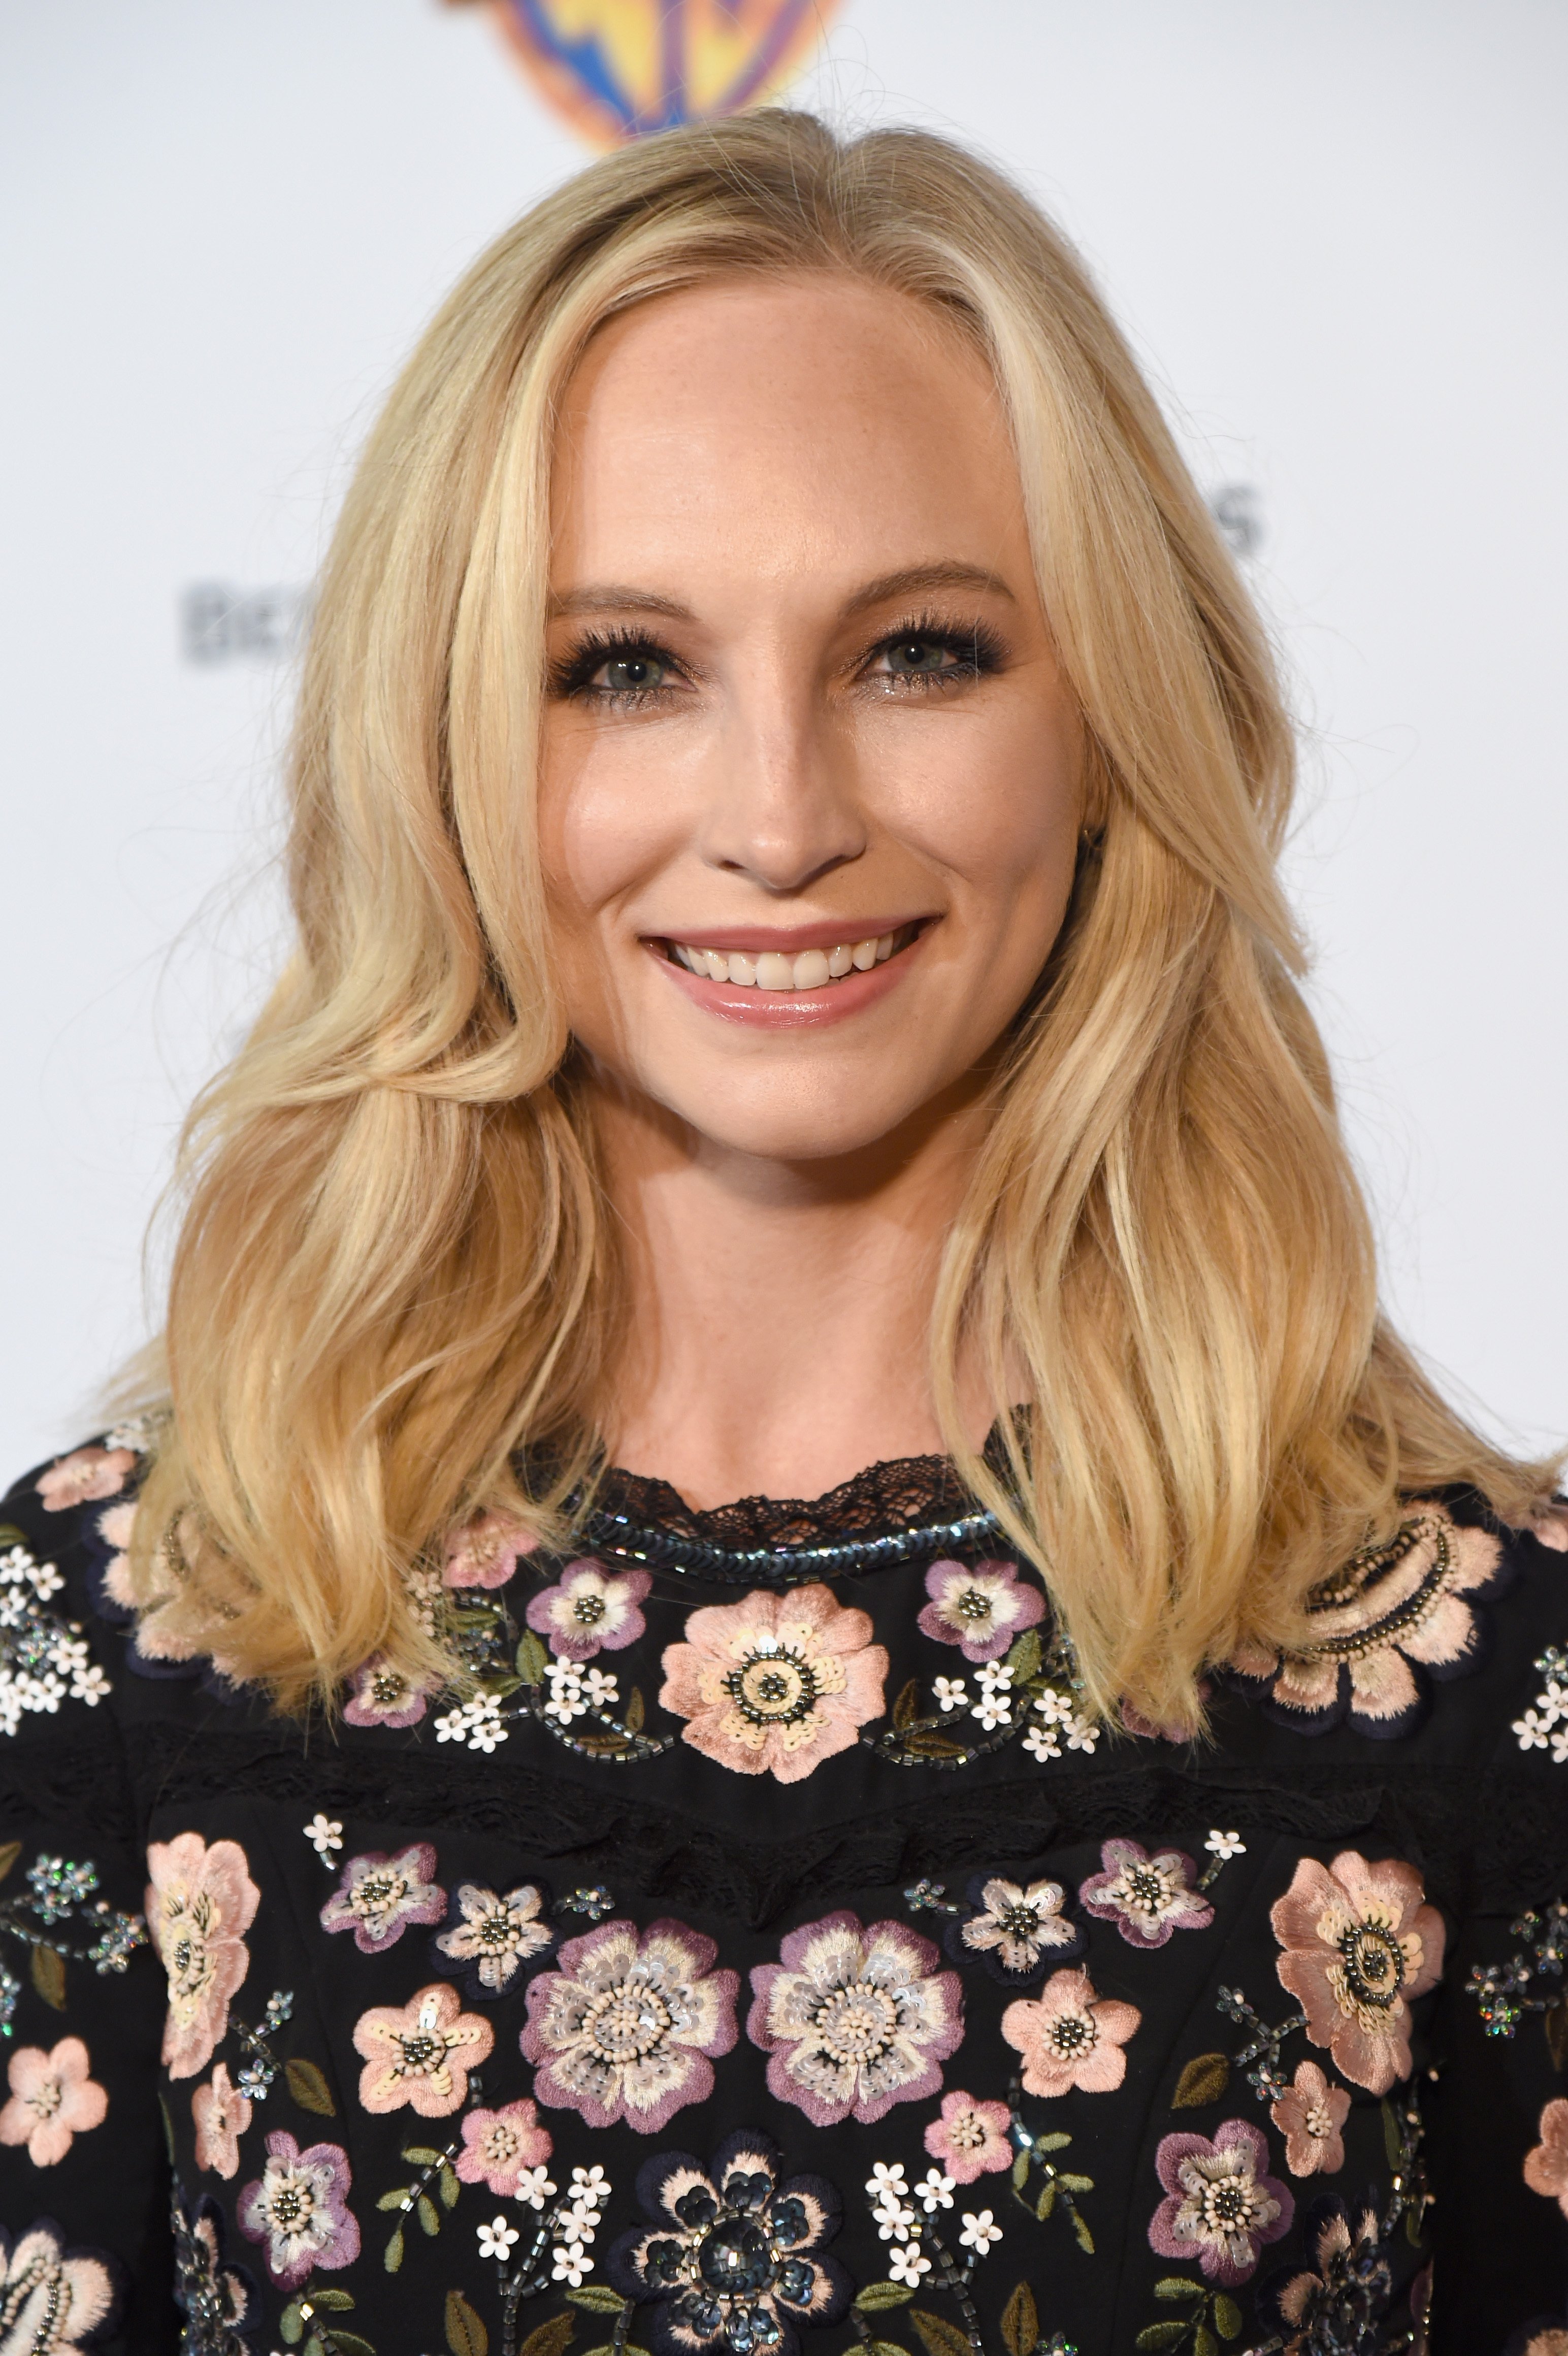 Candice King attends the Barbara Berlanti Heroes Gala Benefitting FCancer at Warner Bros. Studios on October 13, 2018 in Burbank, California | Photo: Getty Images